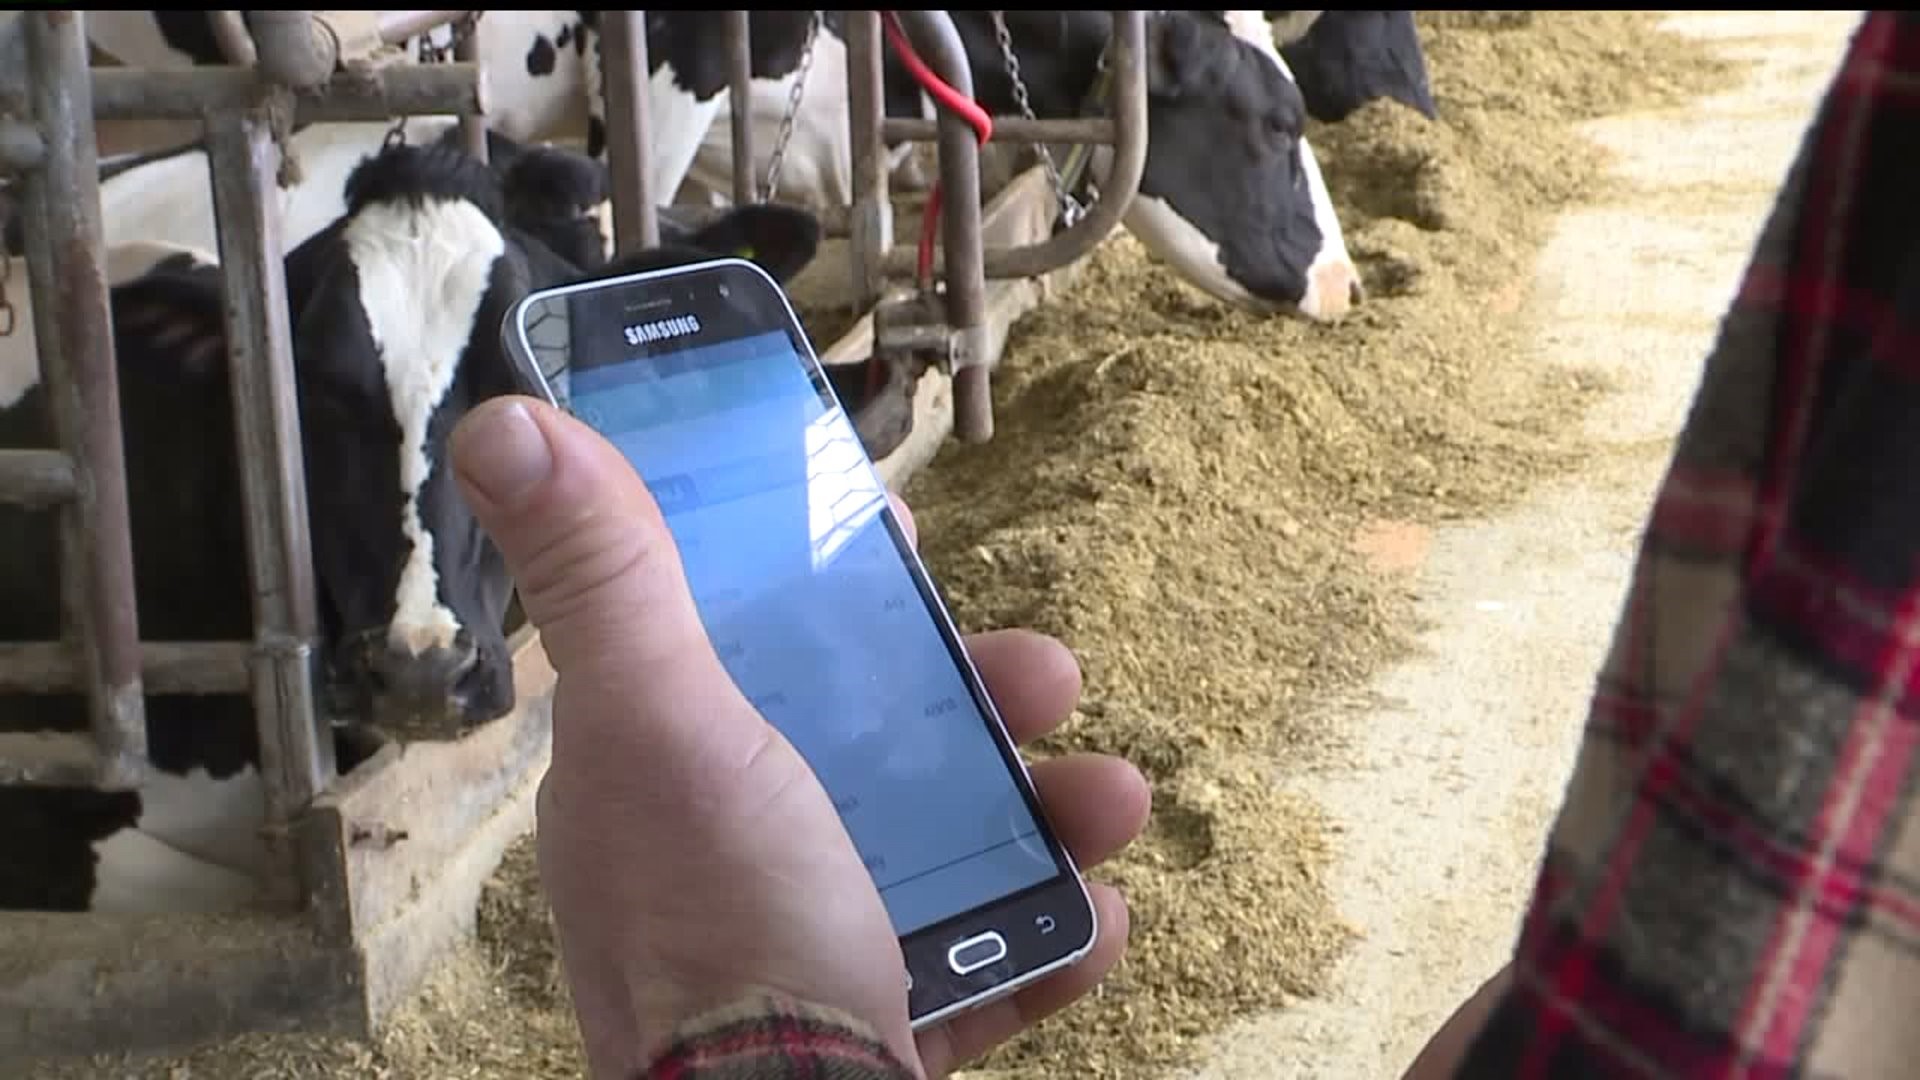 Health tracker for cows: thousands of Pennsylvania cattle wearing new technology